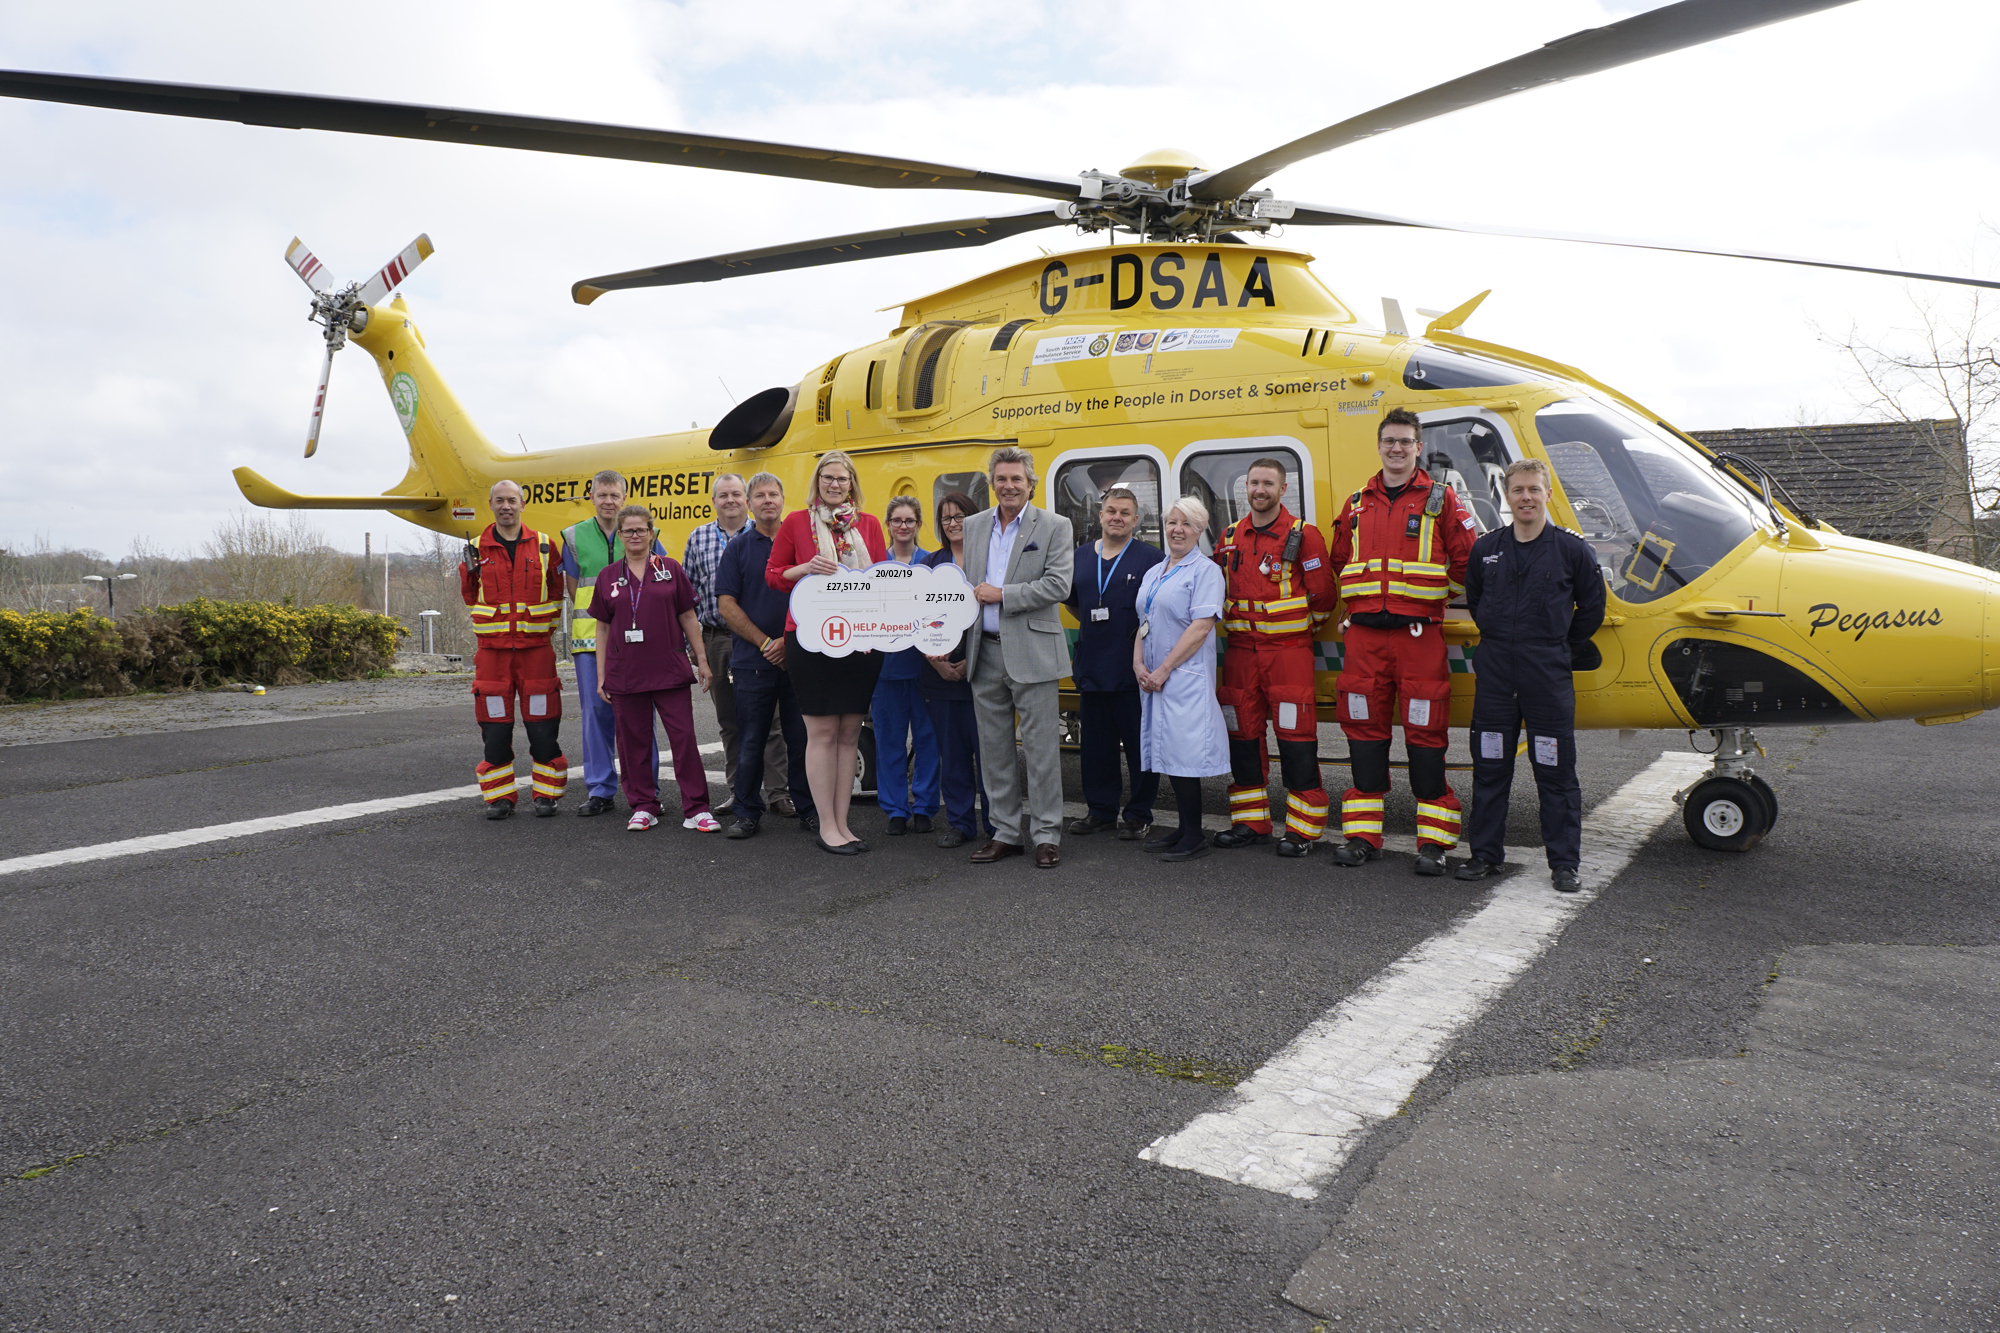 Robert Bertram, CEO of the HELP Appeal presents the donation to Dorset County Hospital. HELP Appeal Photo